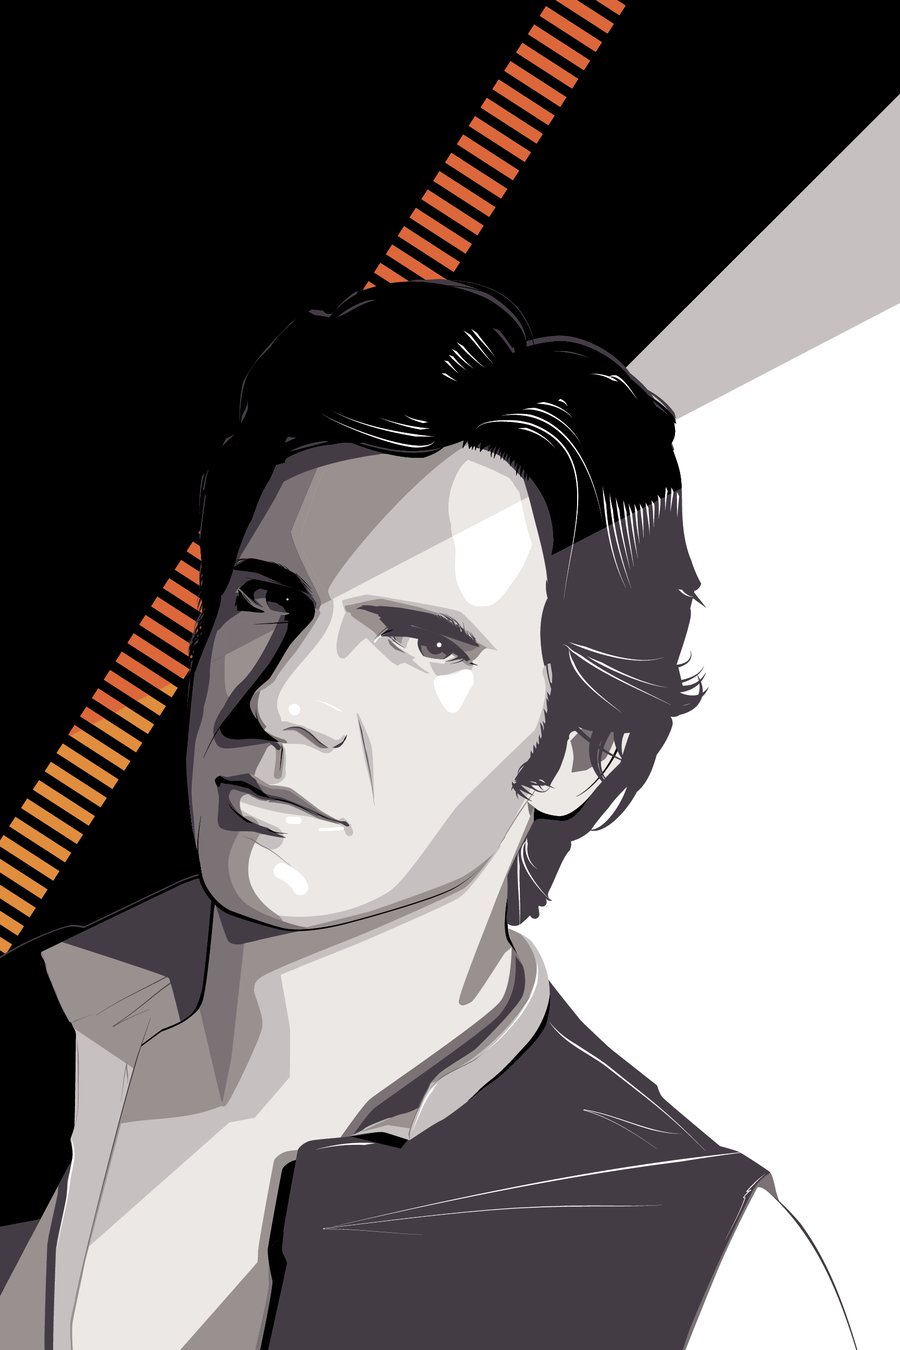 Image of Han Solo